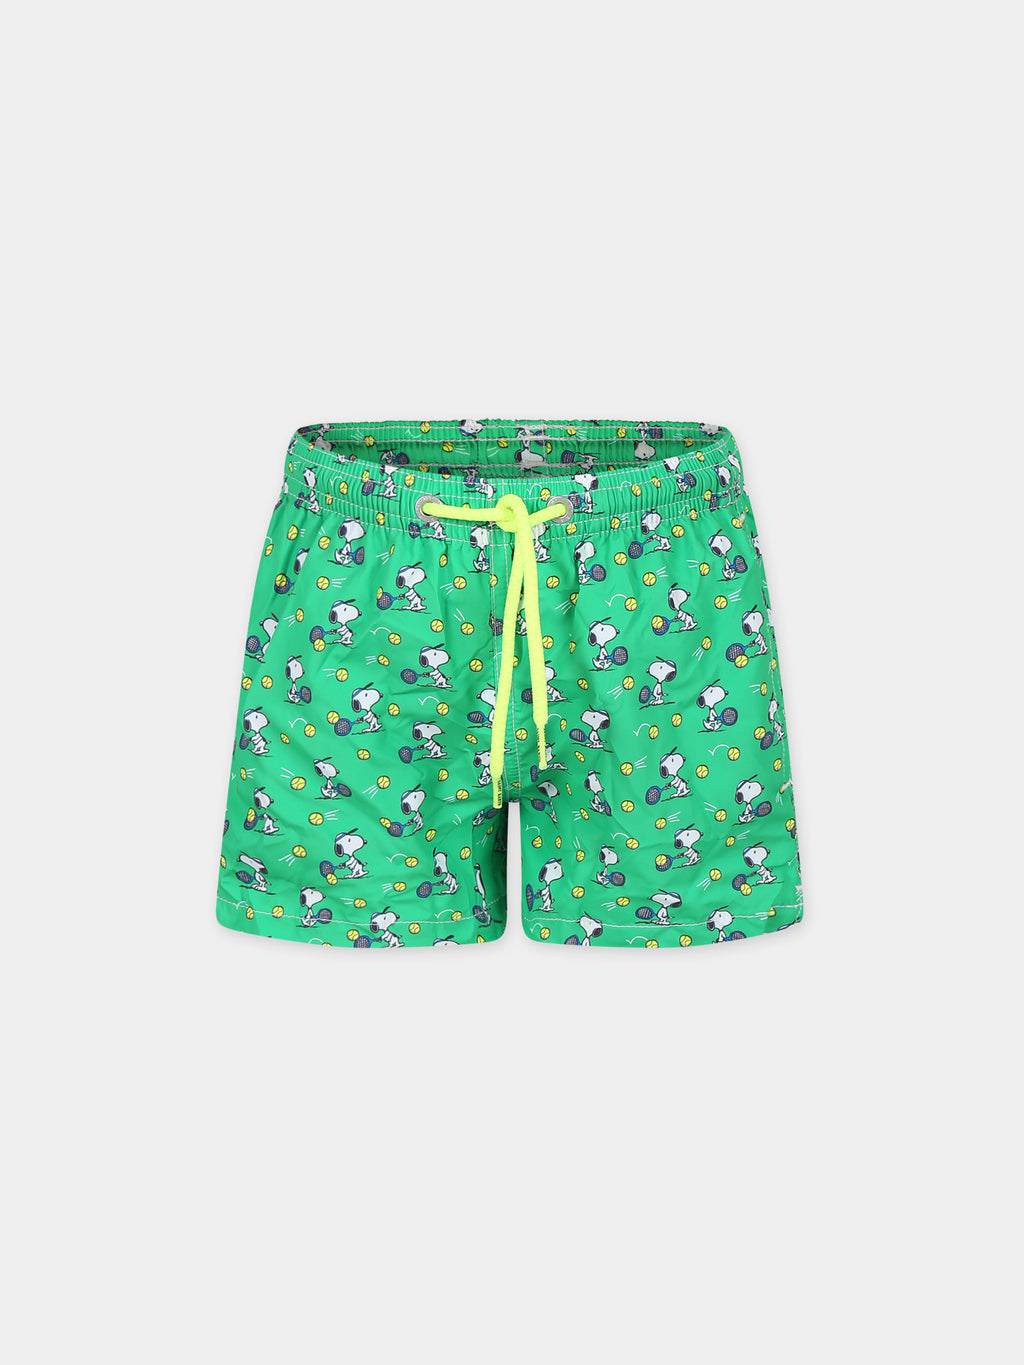 Green swim shorts for boy with Snoopy print